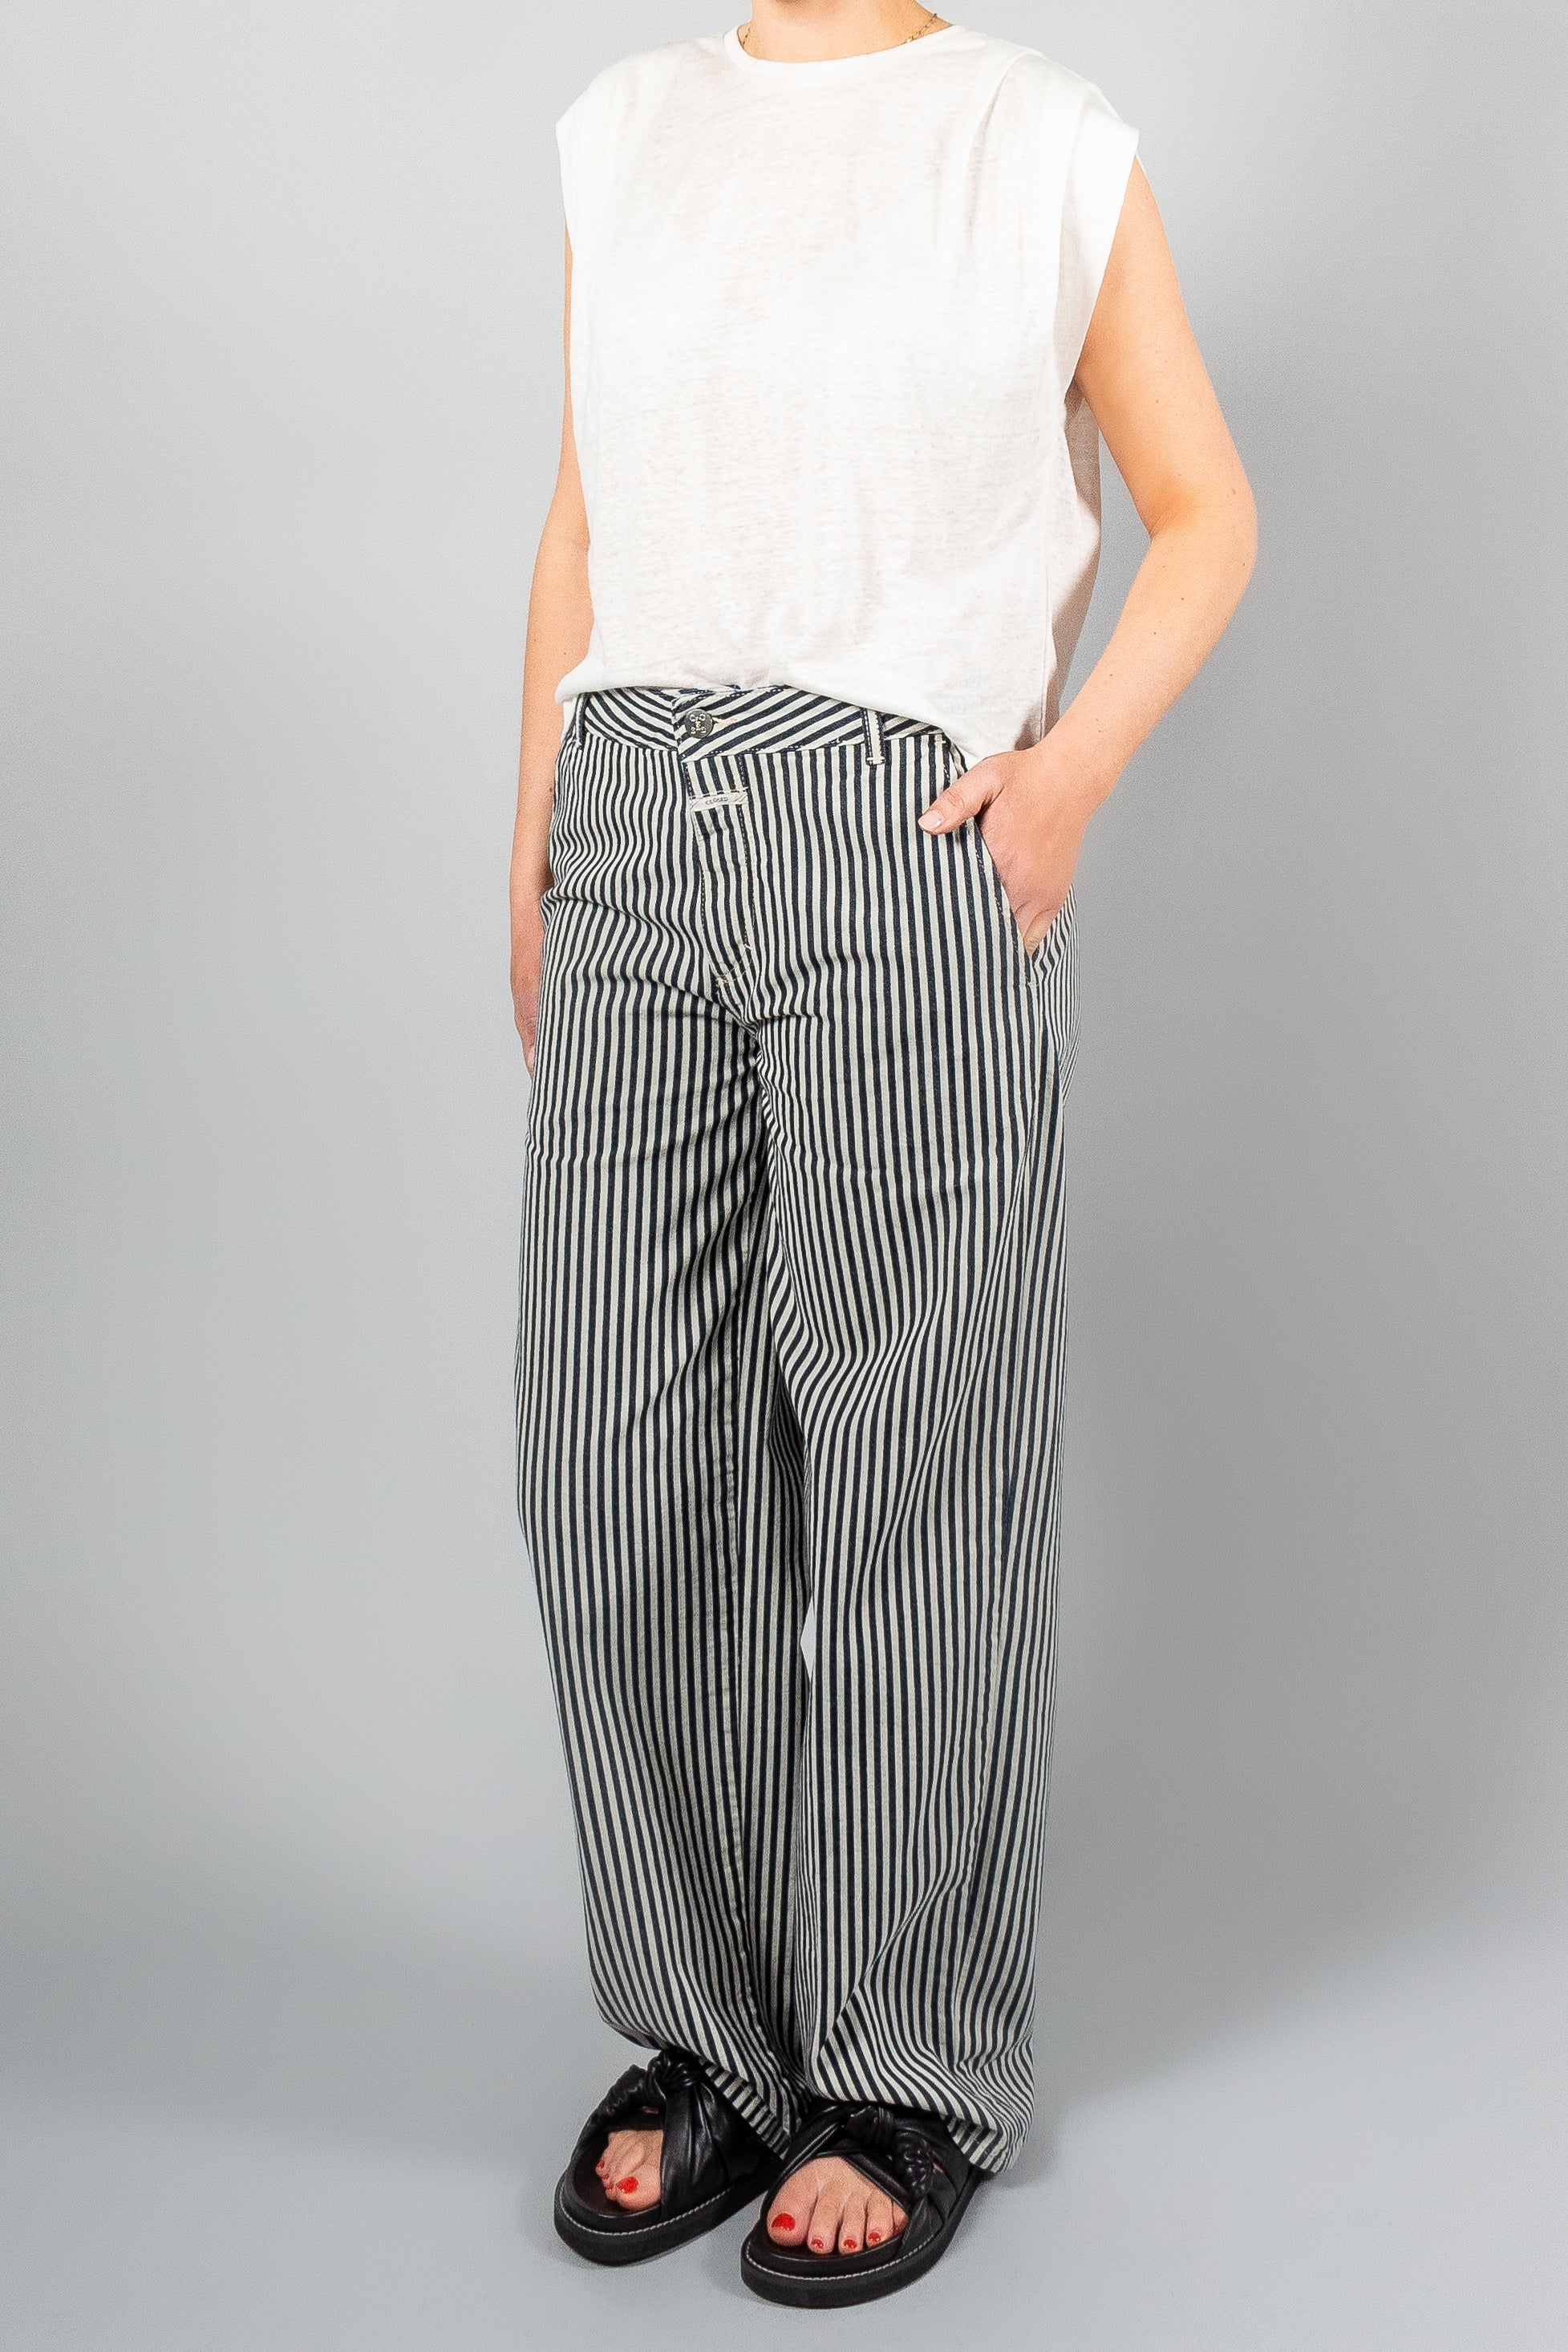 Closed Jurdy Striped Denim-Pants and Shorts-Misch-Boutique-Vancouver-Canada-misch.ca